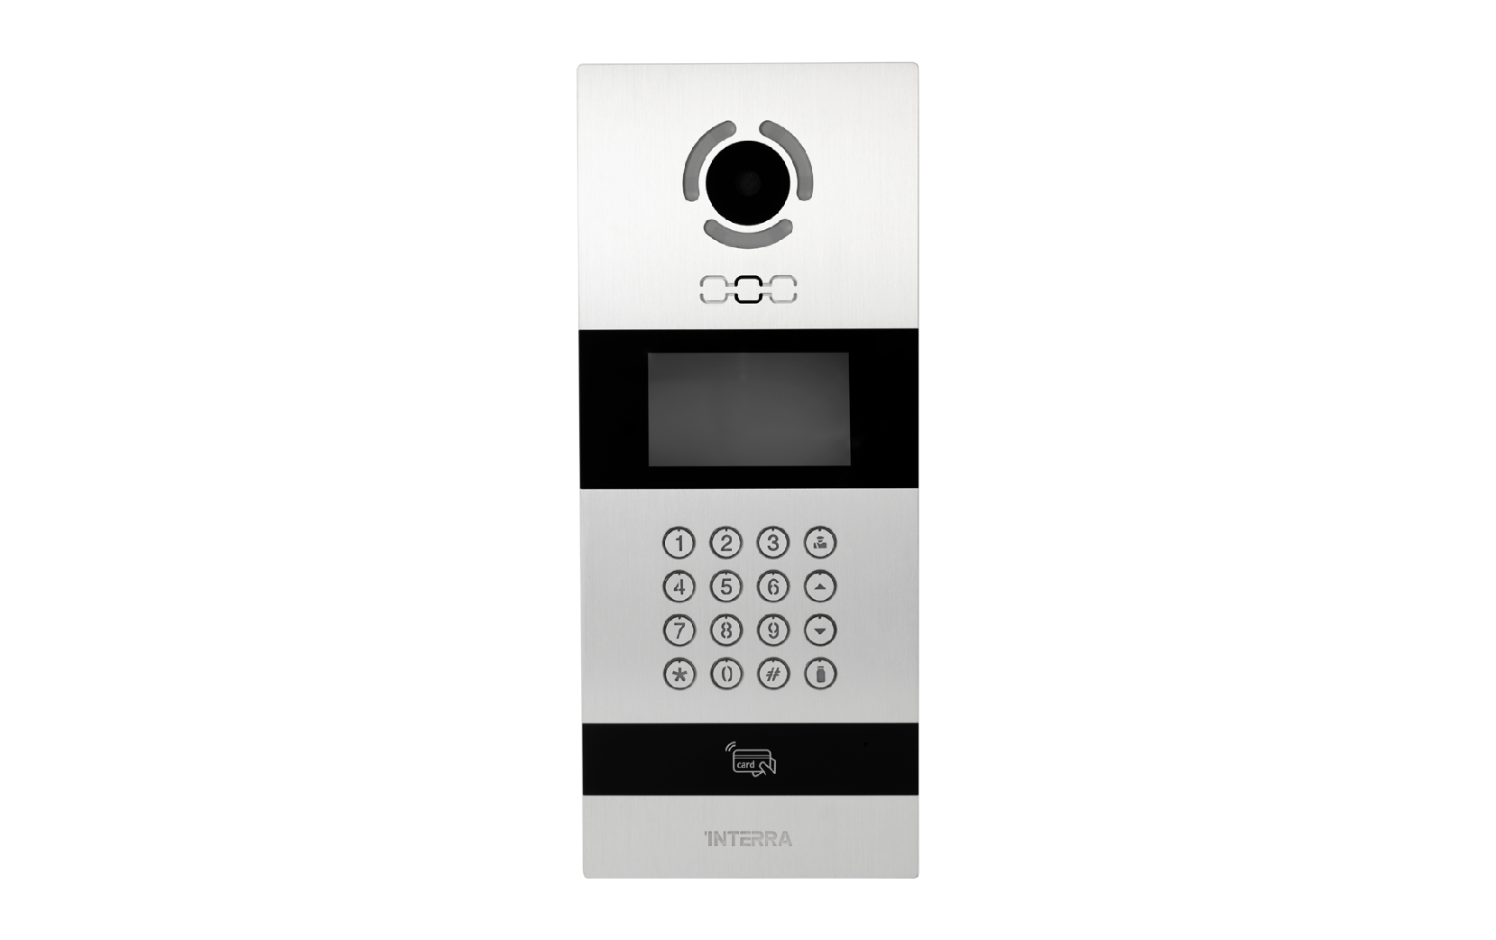 Android Outdoor Video Intercom w/ Face Recognition - 4.3" Color TFT LCD - Aluminium Body with Mechanical Buttons